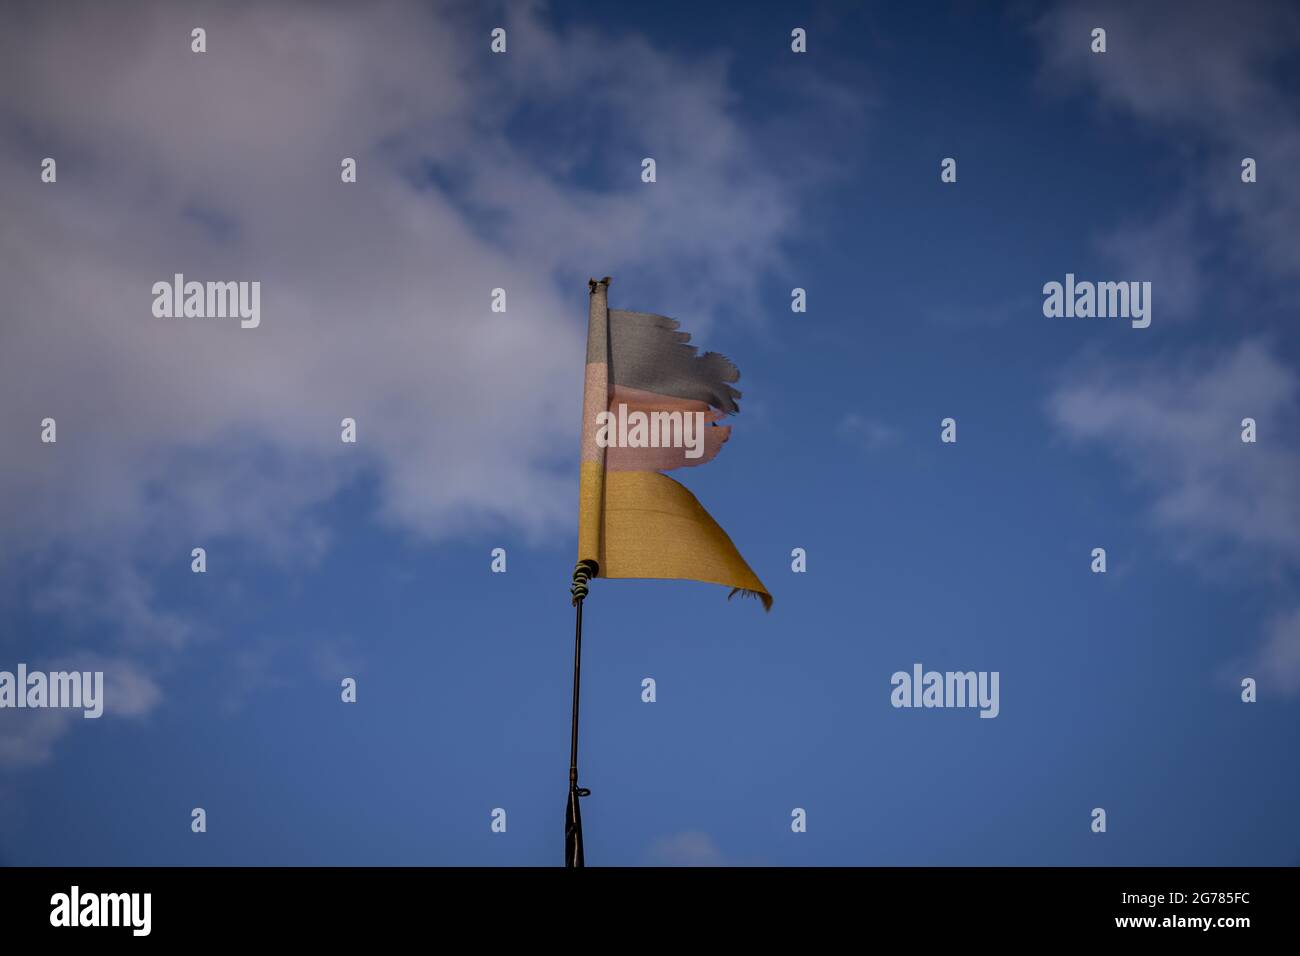 A torn German flag with clouds in the background, seen near Klein Kubitz, Mecklenburg-Western Pomerania, Germany Stock Photo